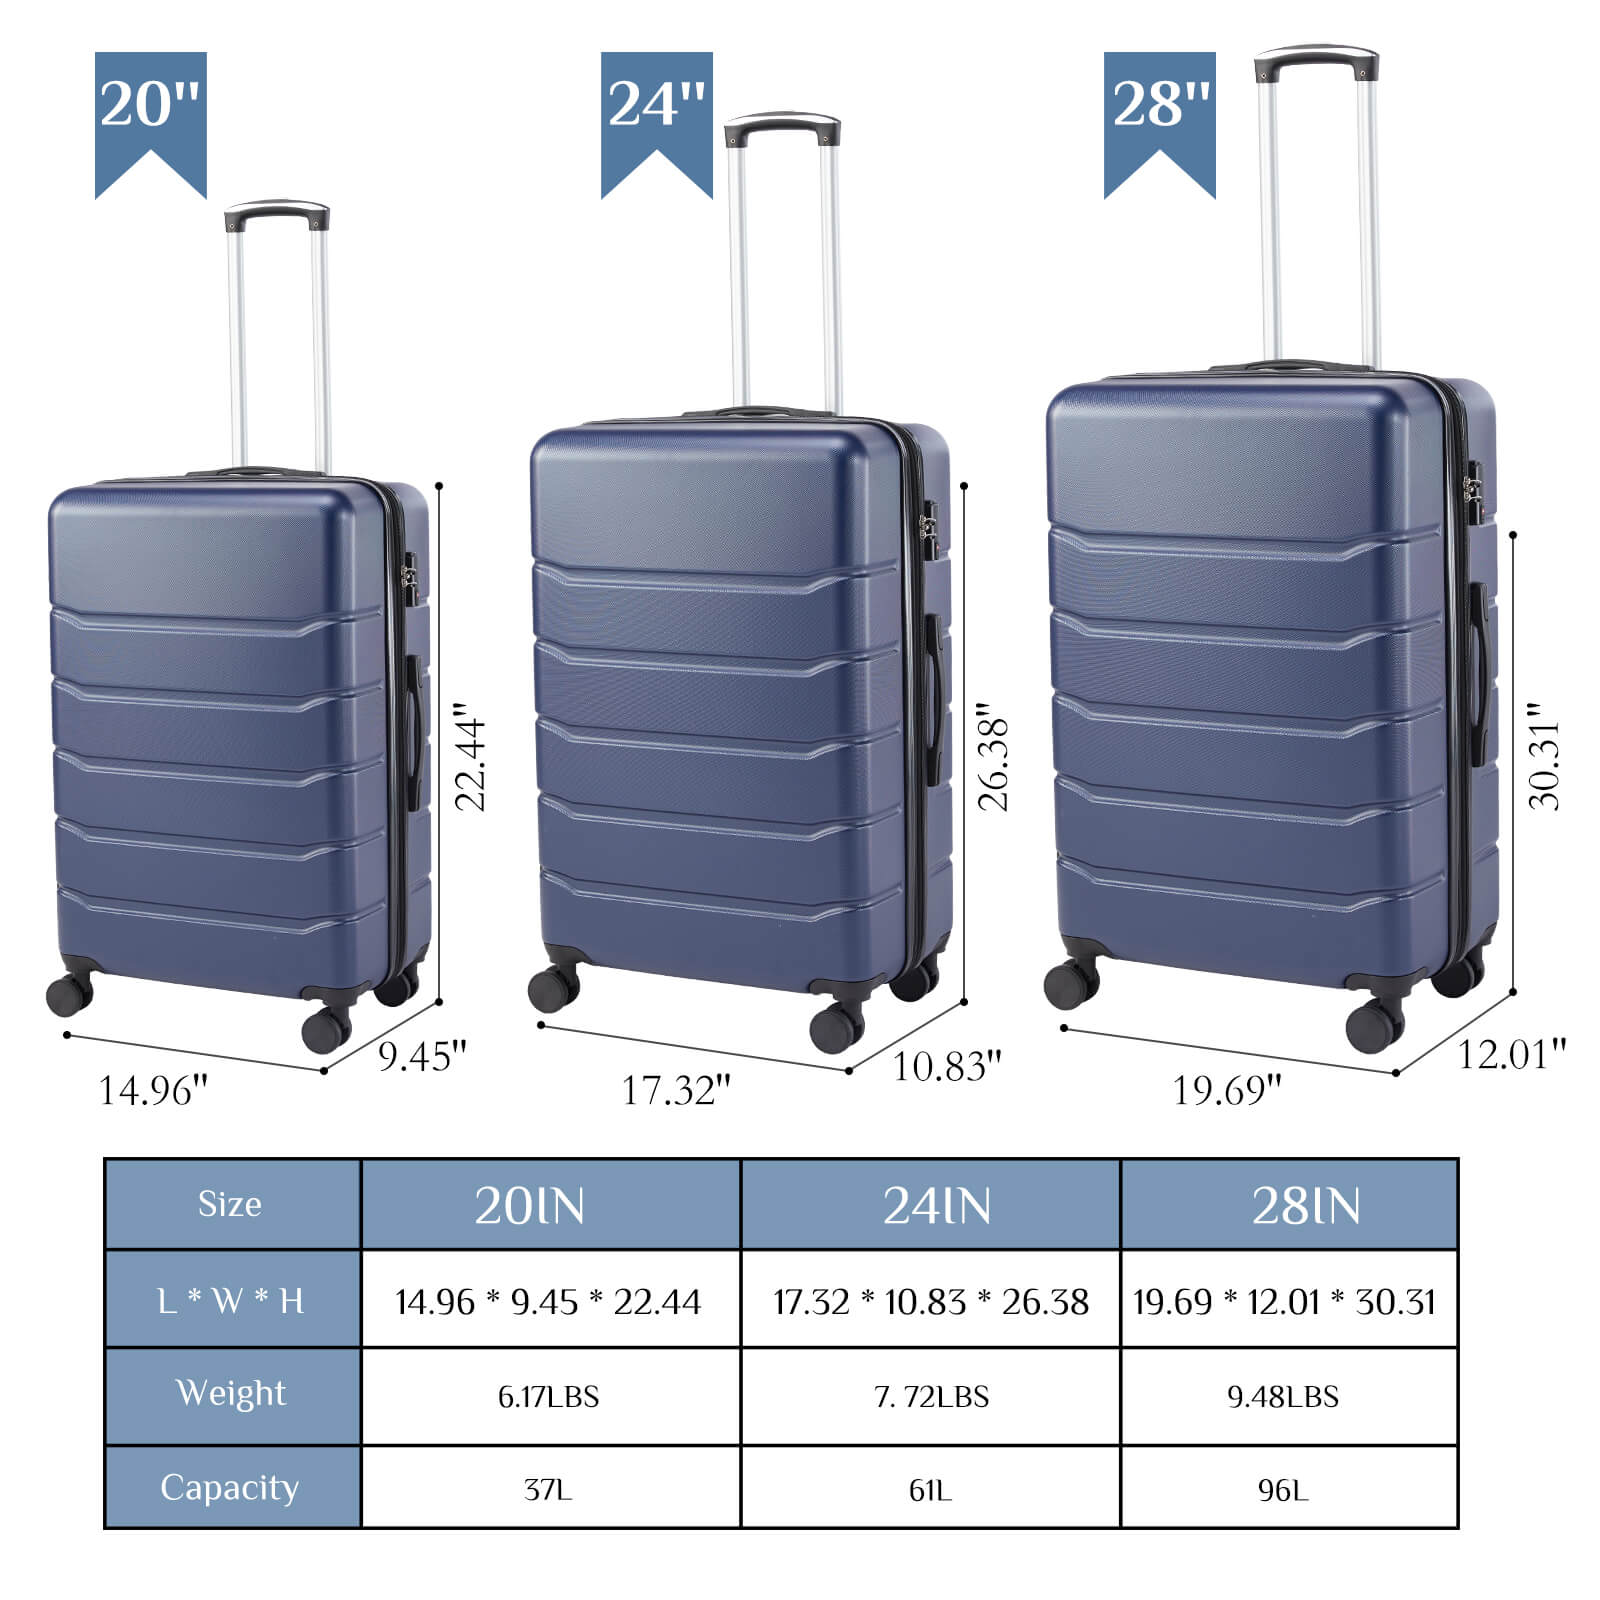 Lightweight Trolley Case - 20/24/28 inches, with TSA lock, portable, for travelling, business trips